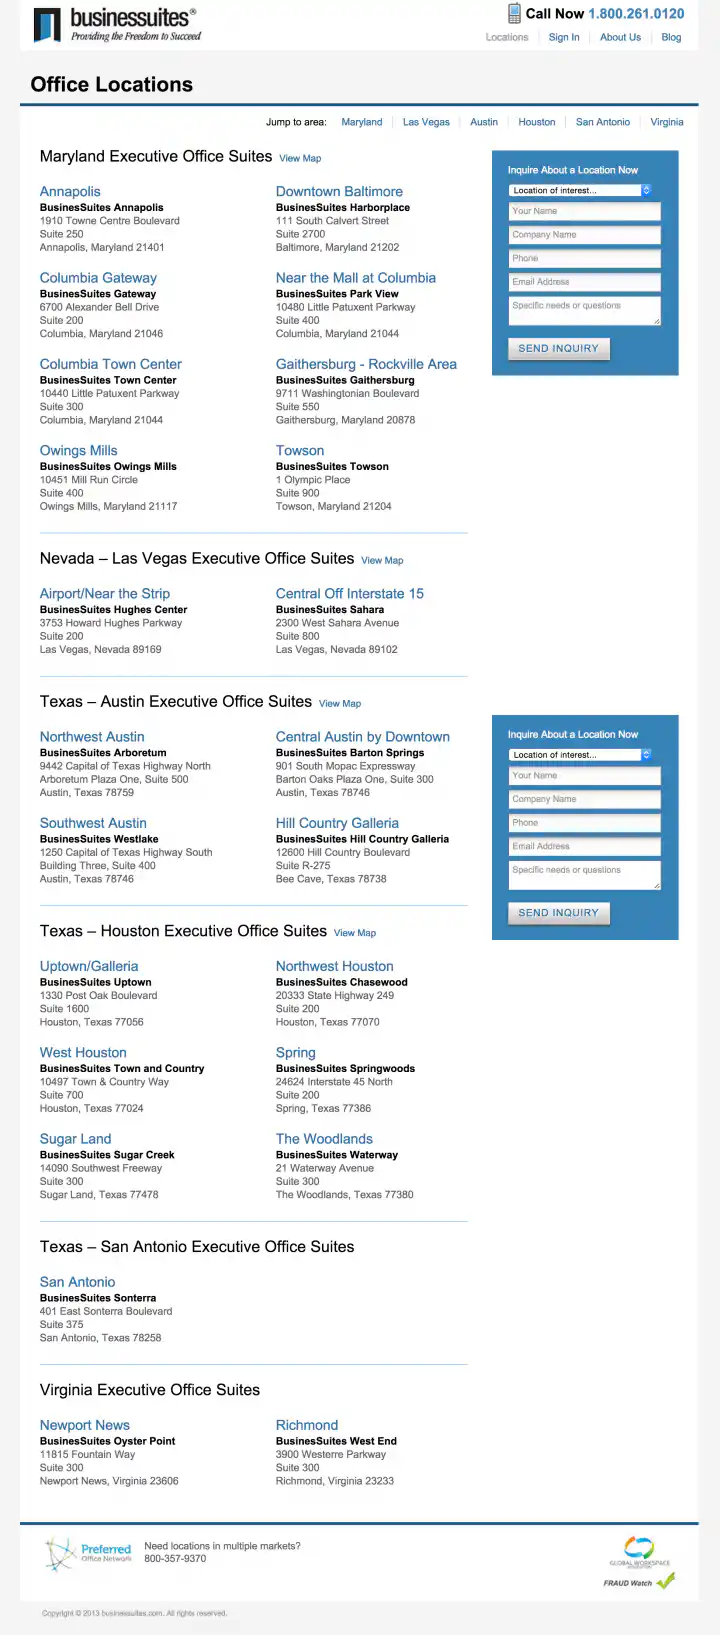 BusinesSuites Office Locations Page